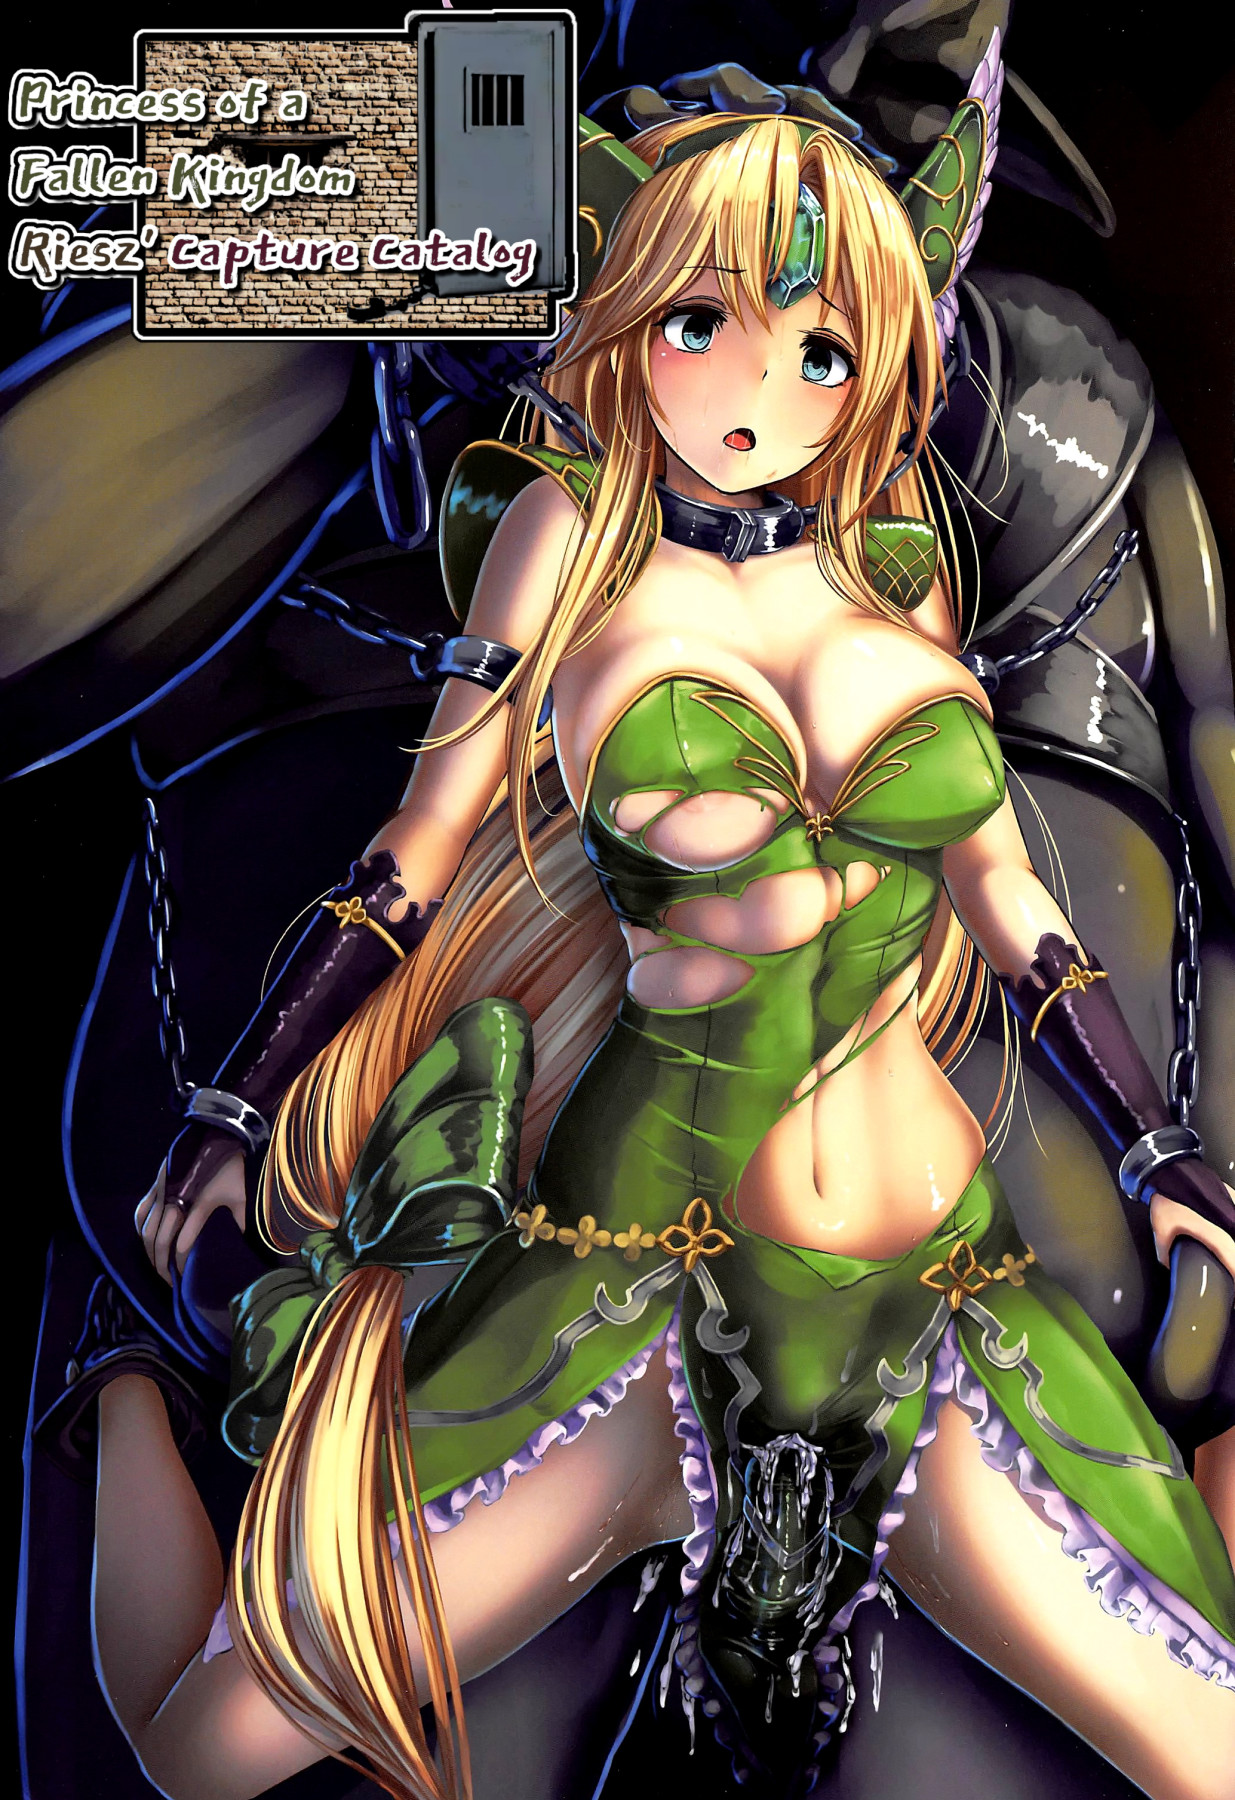 Hentai Manga Comic-Queen of a Ruined Country  Riesz's Capture Catalogue-Read-1